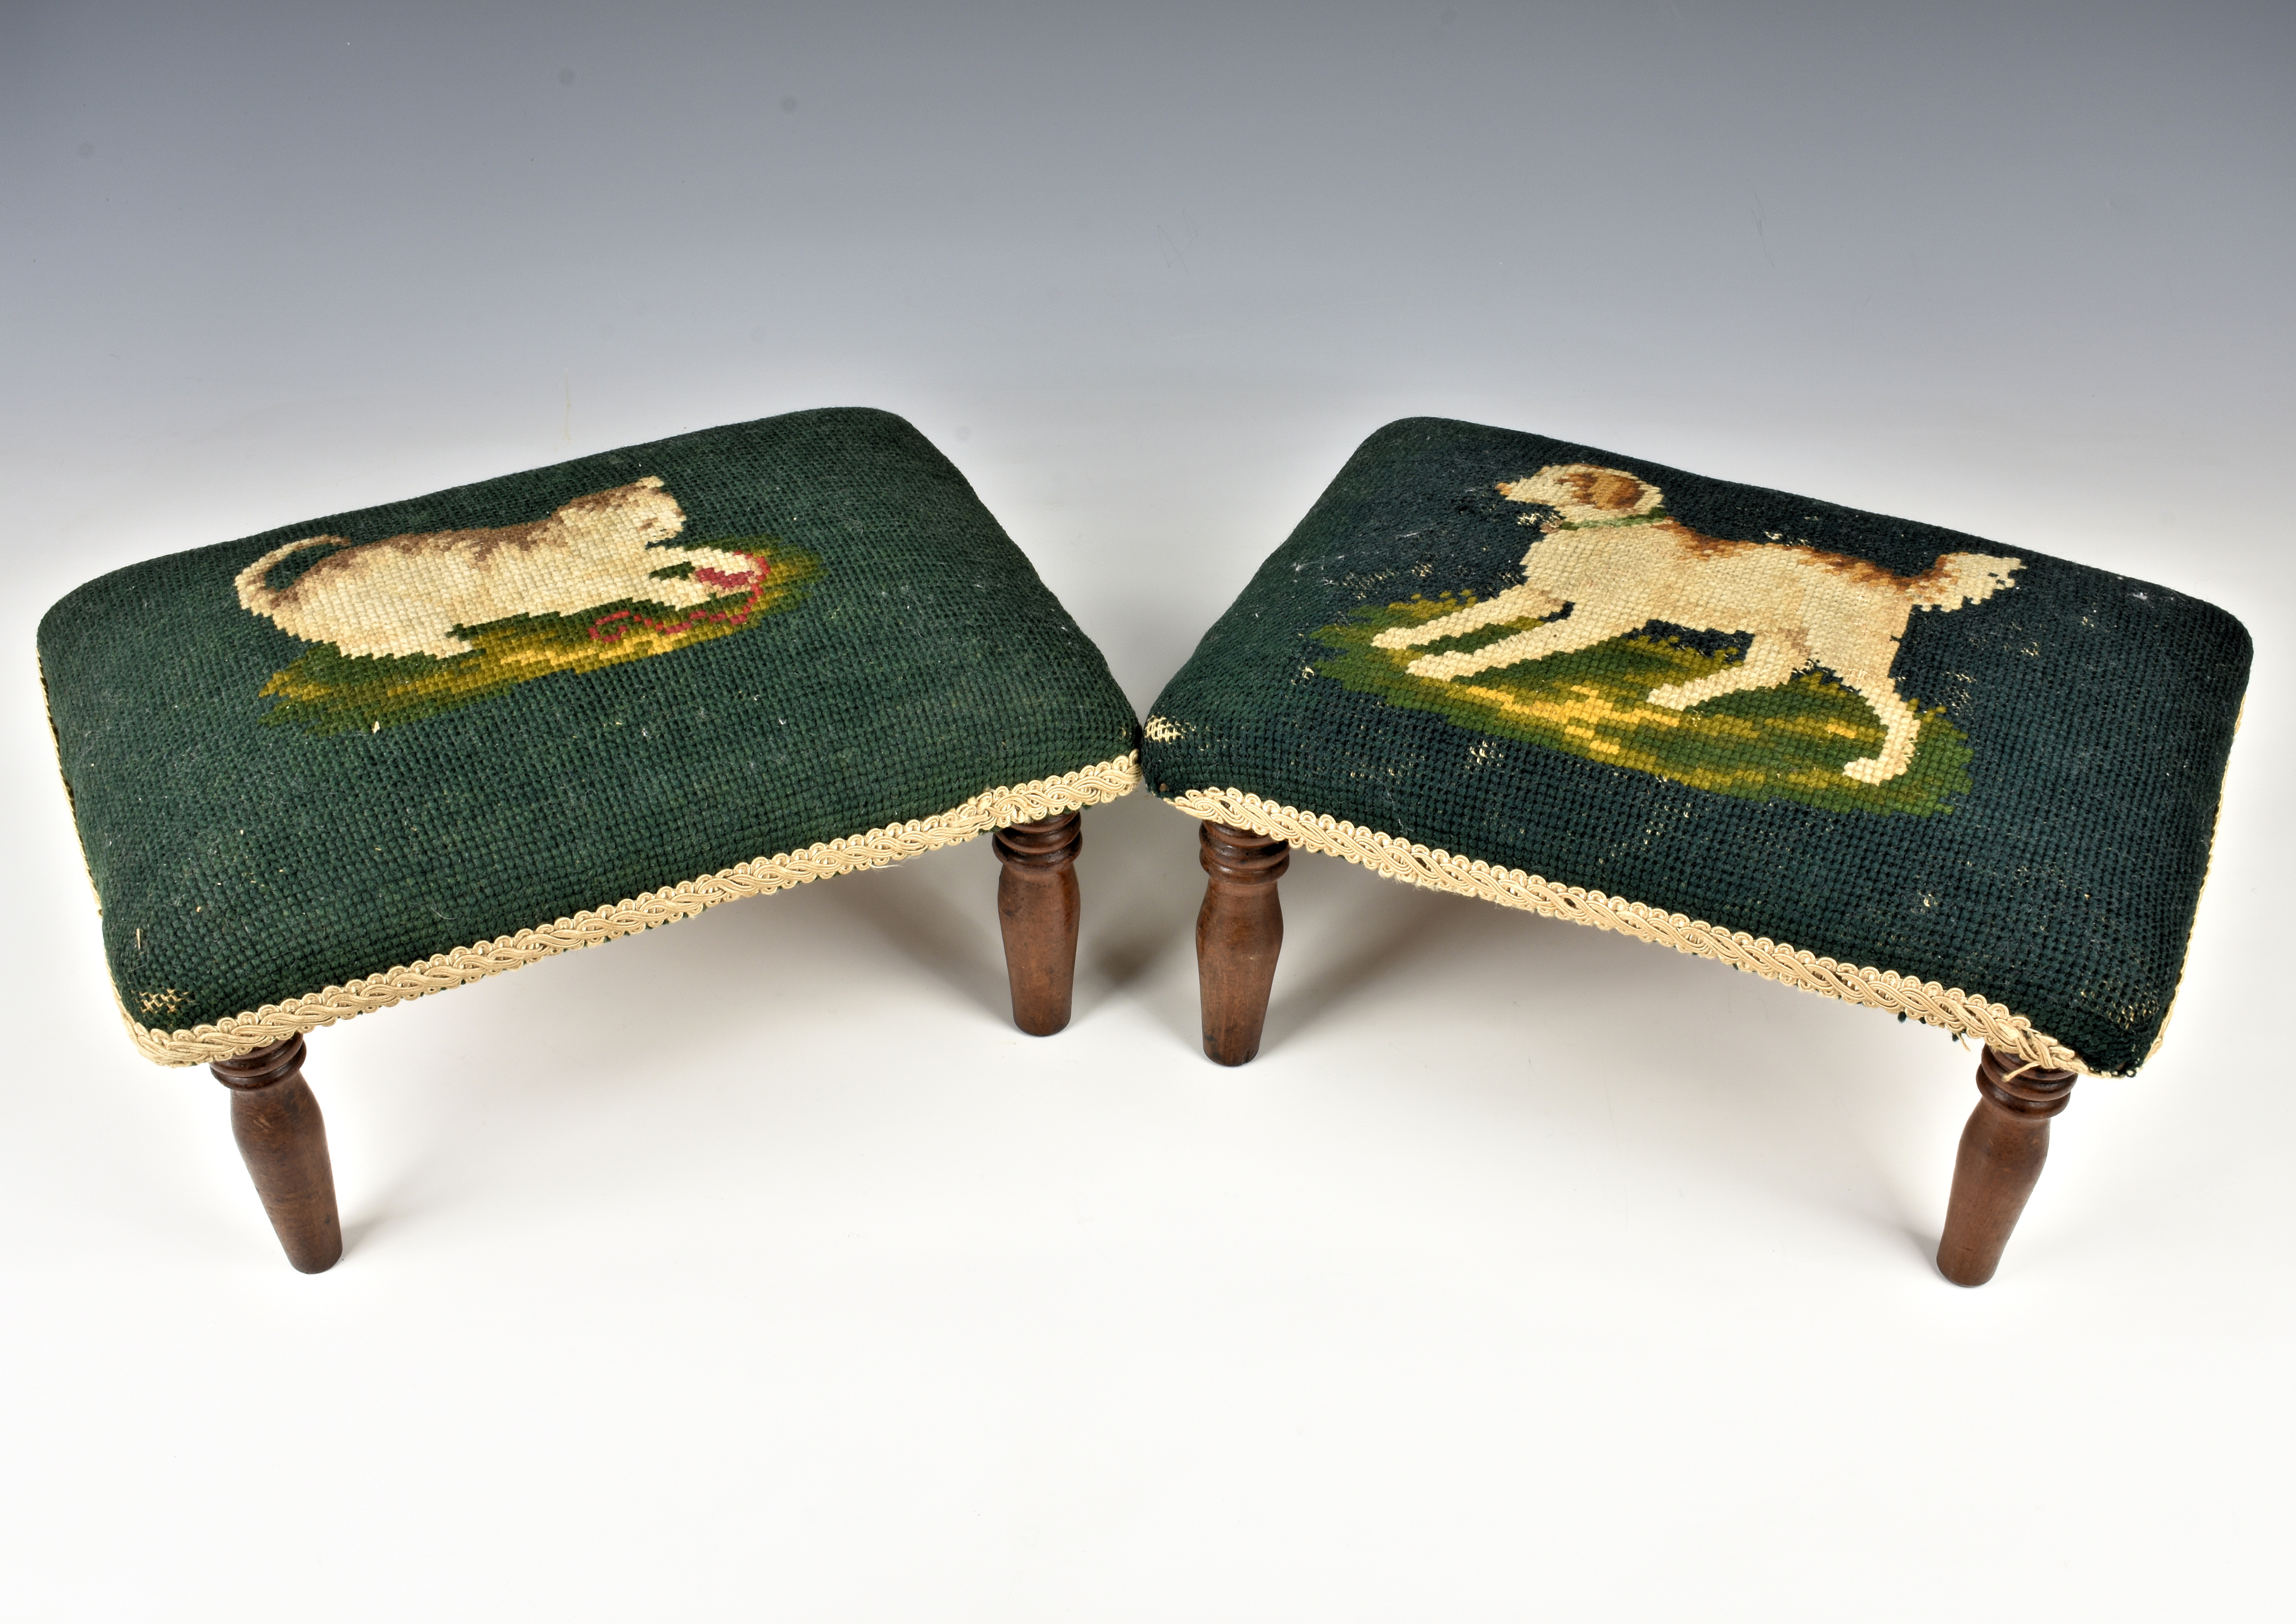 A pair of Victorian embroidered foot stools the rectangular cushions embroidered with a kitten